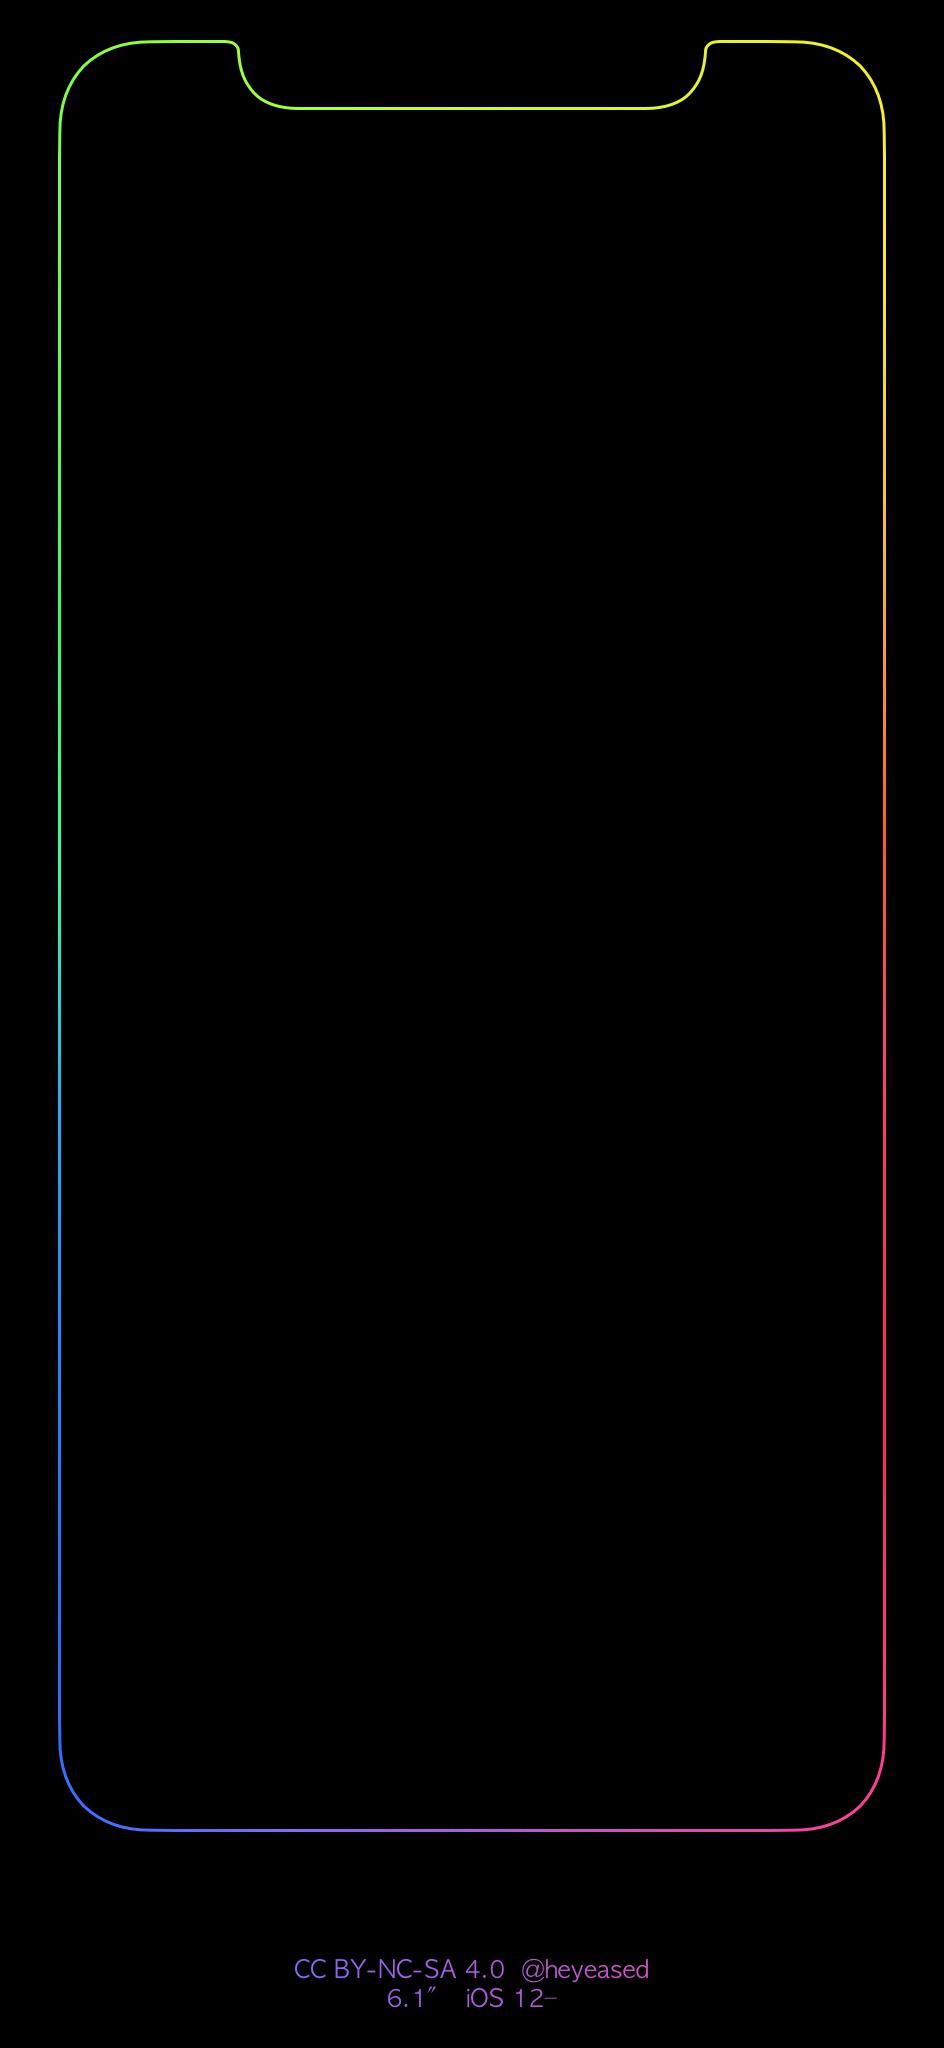 Iphone Xr Background